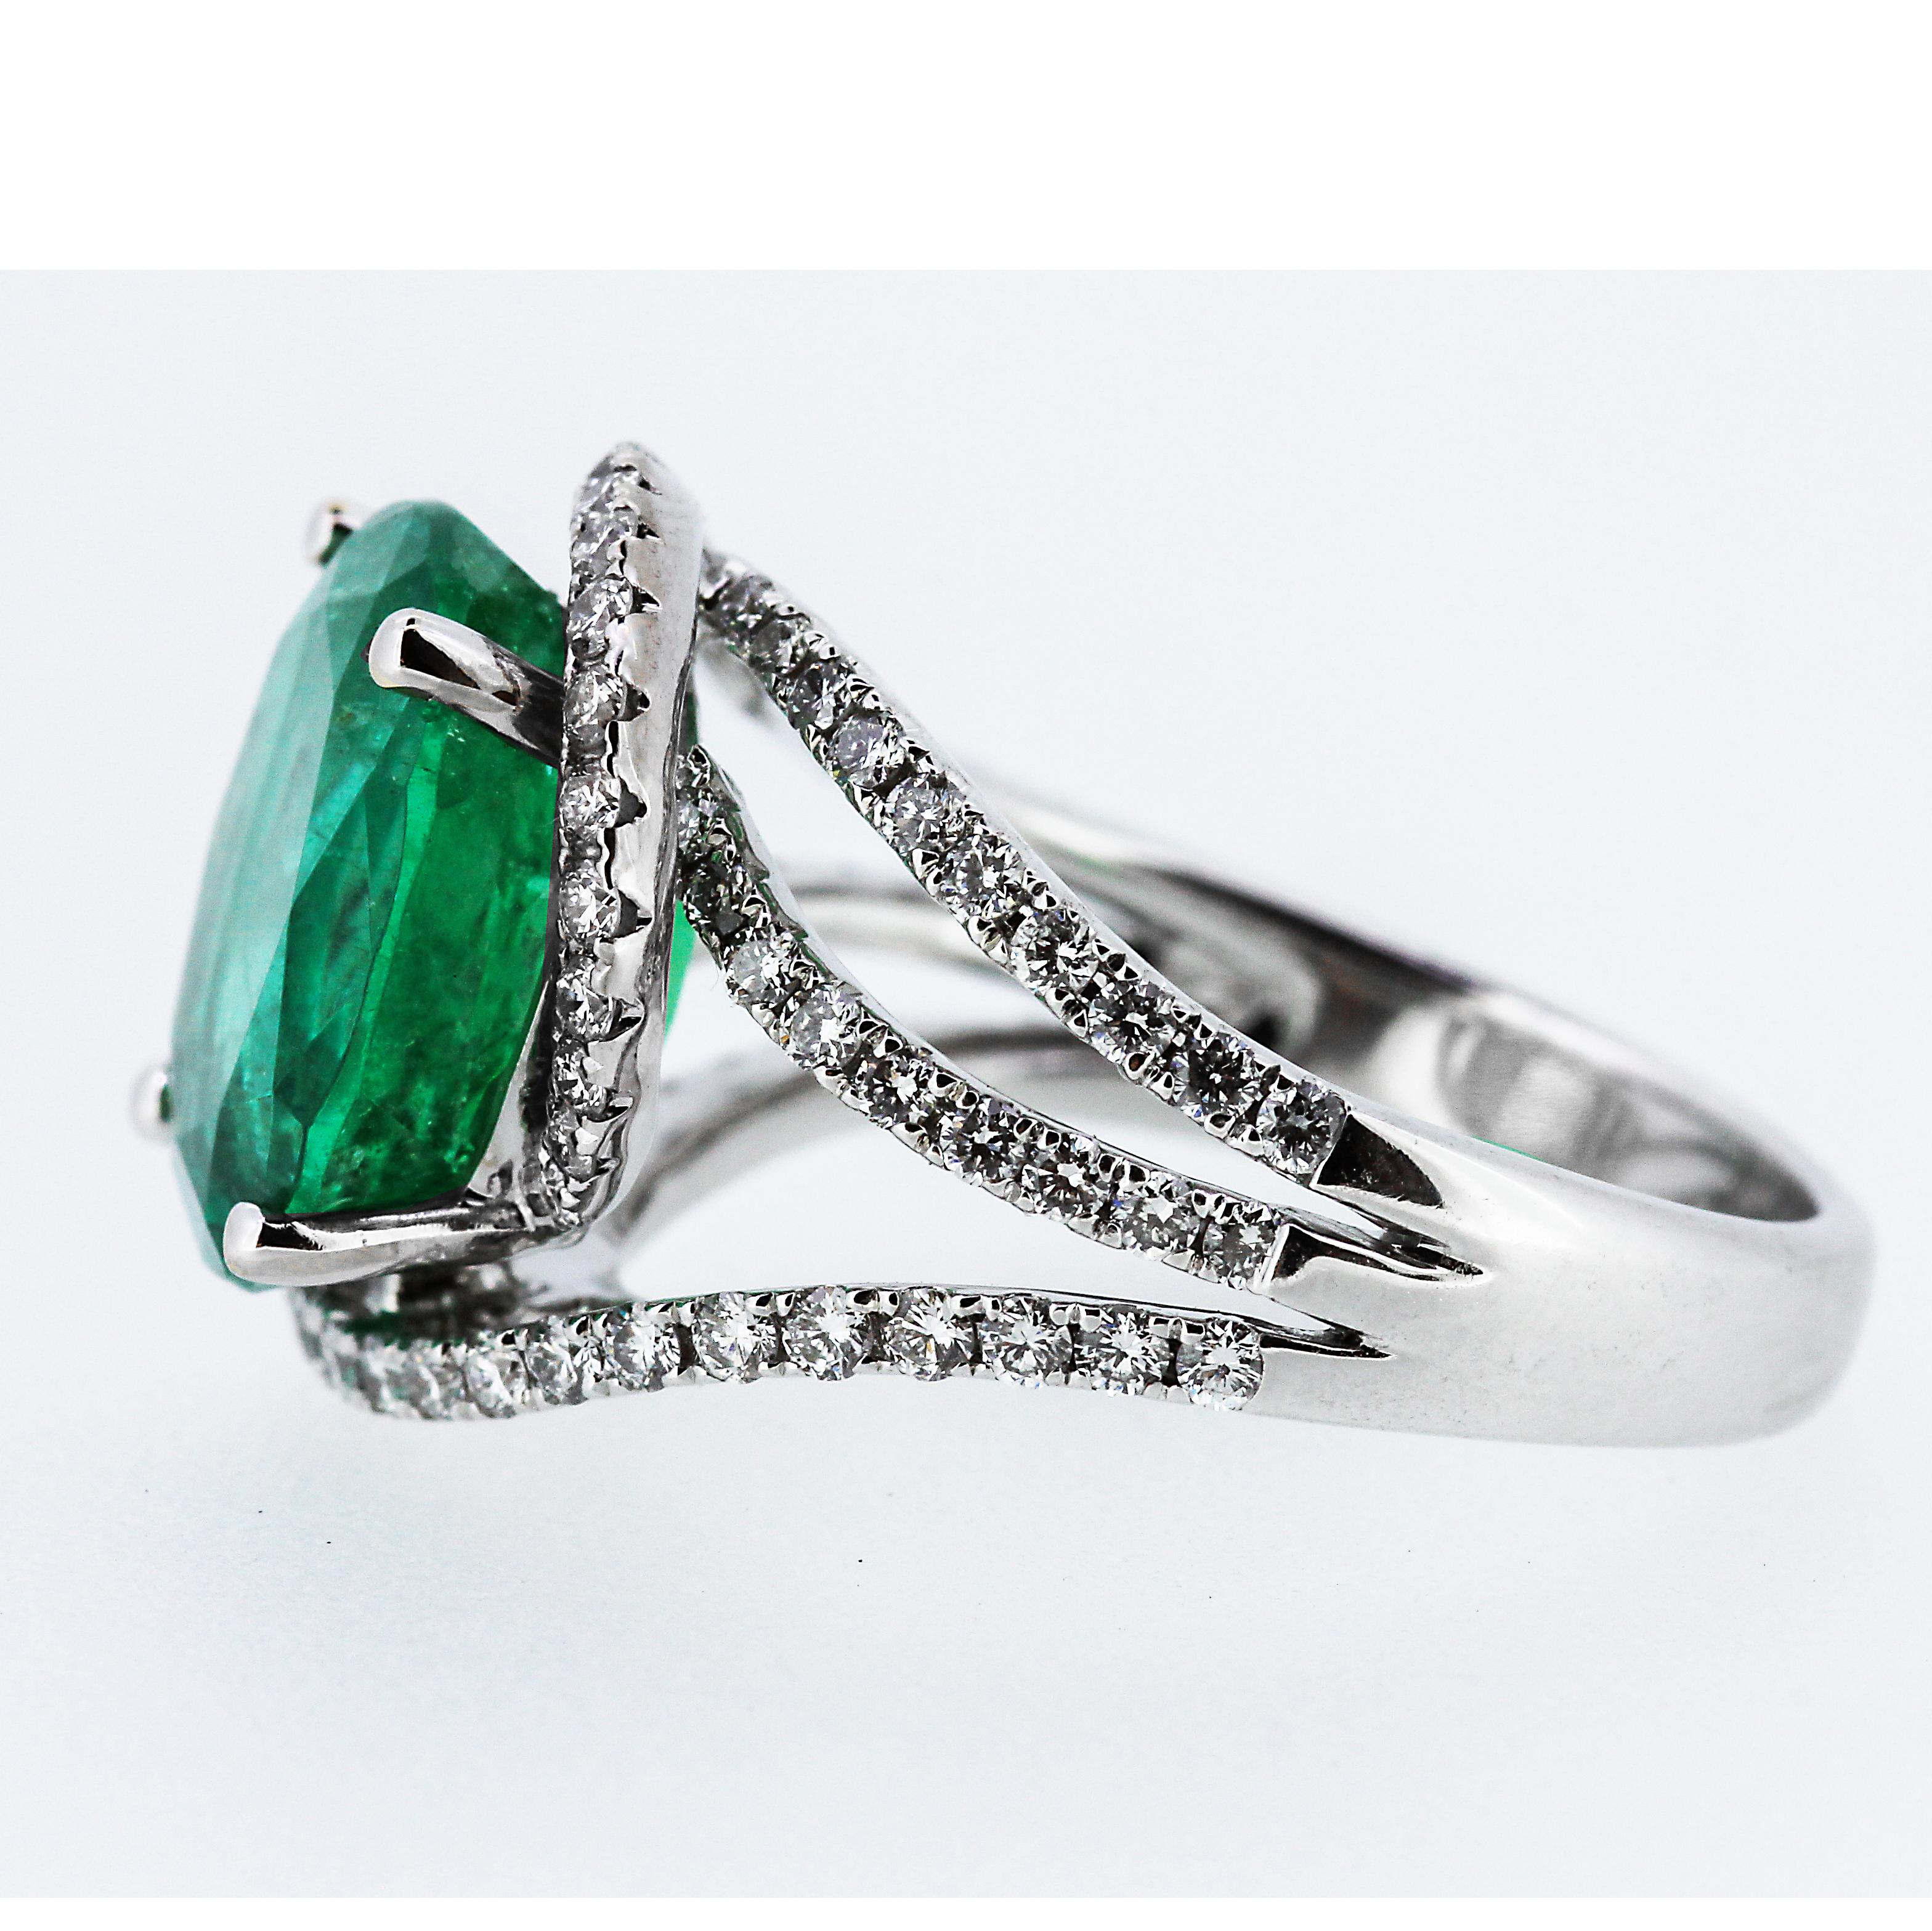 A remarkable fine Colombian emerald set in 18 ct white gold and surrounded by beautifully design round brilliant cut diamonds. The 5.3 carat emerald shows very good color being deep green and highly transparent. Pictures shows the exact colour and